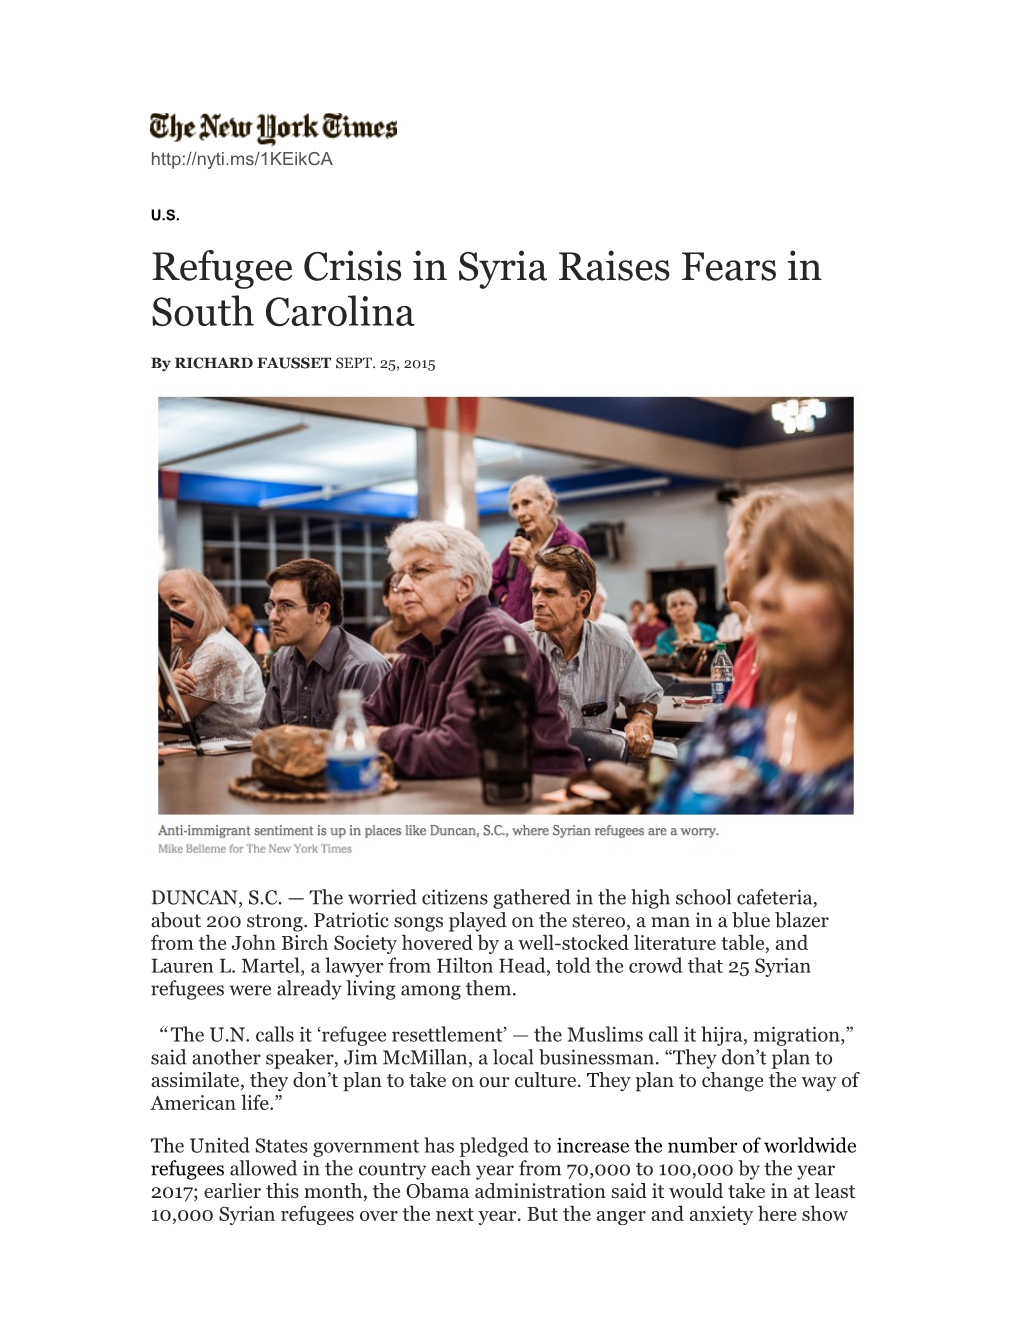 Refugee Crisis in Syria Raises Fears in South Carolina